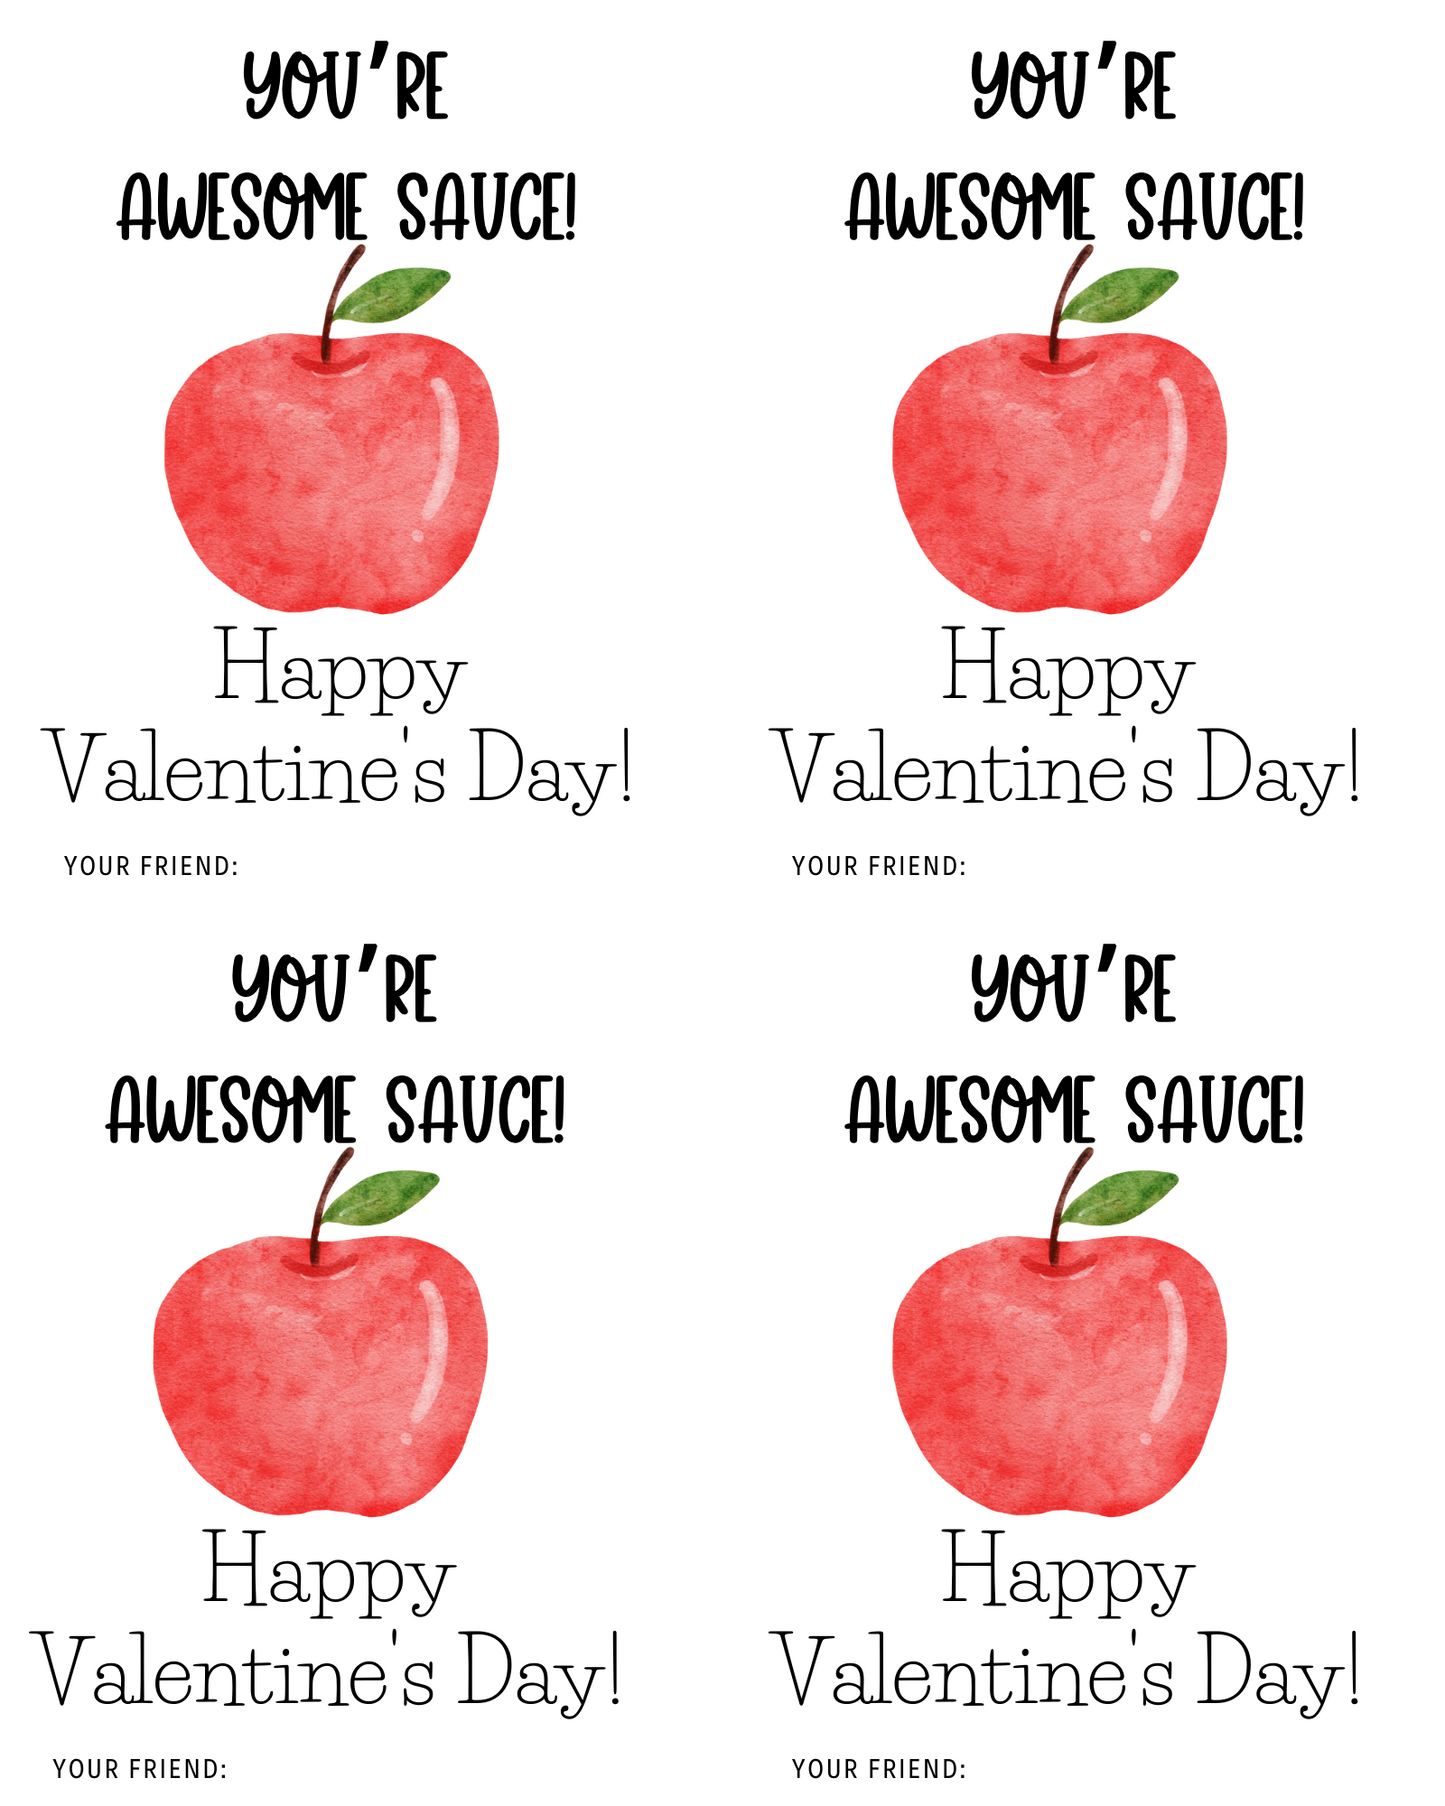 Awesome Sauce Printable Valentine's Day Cards - Digital Download